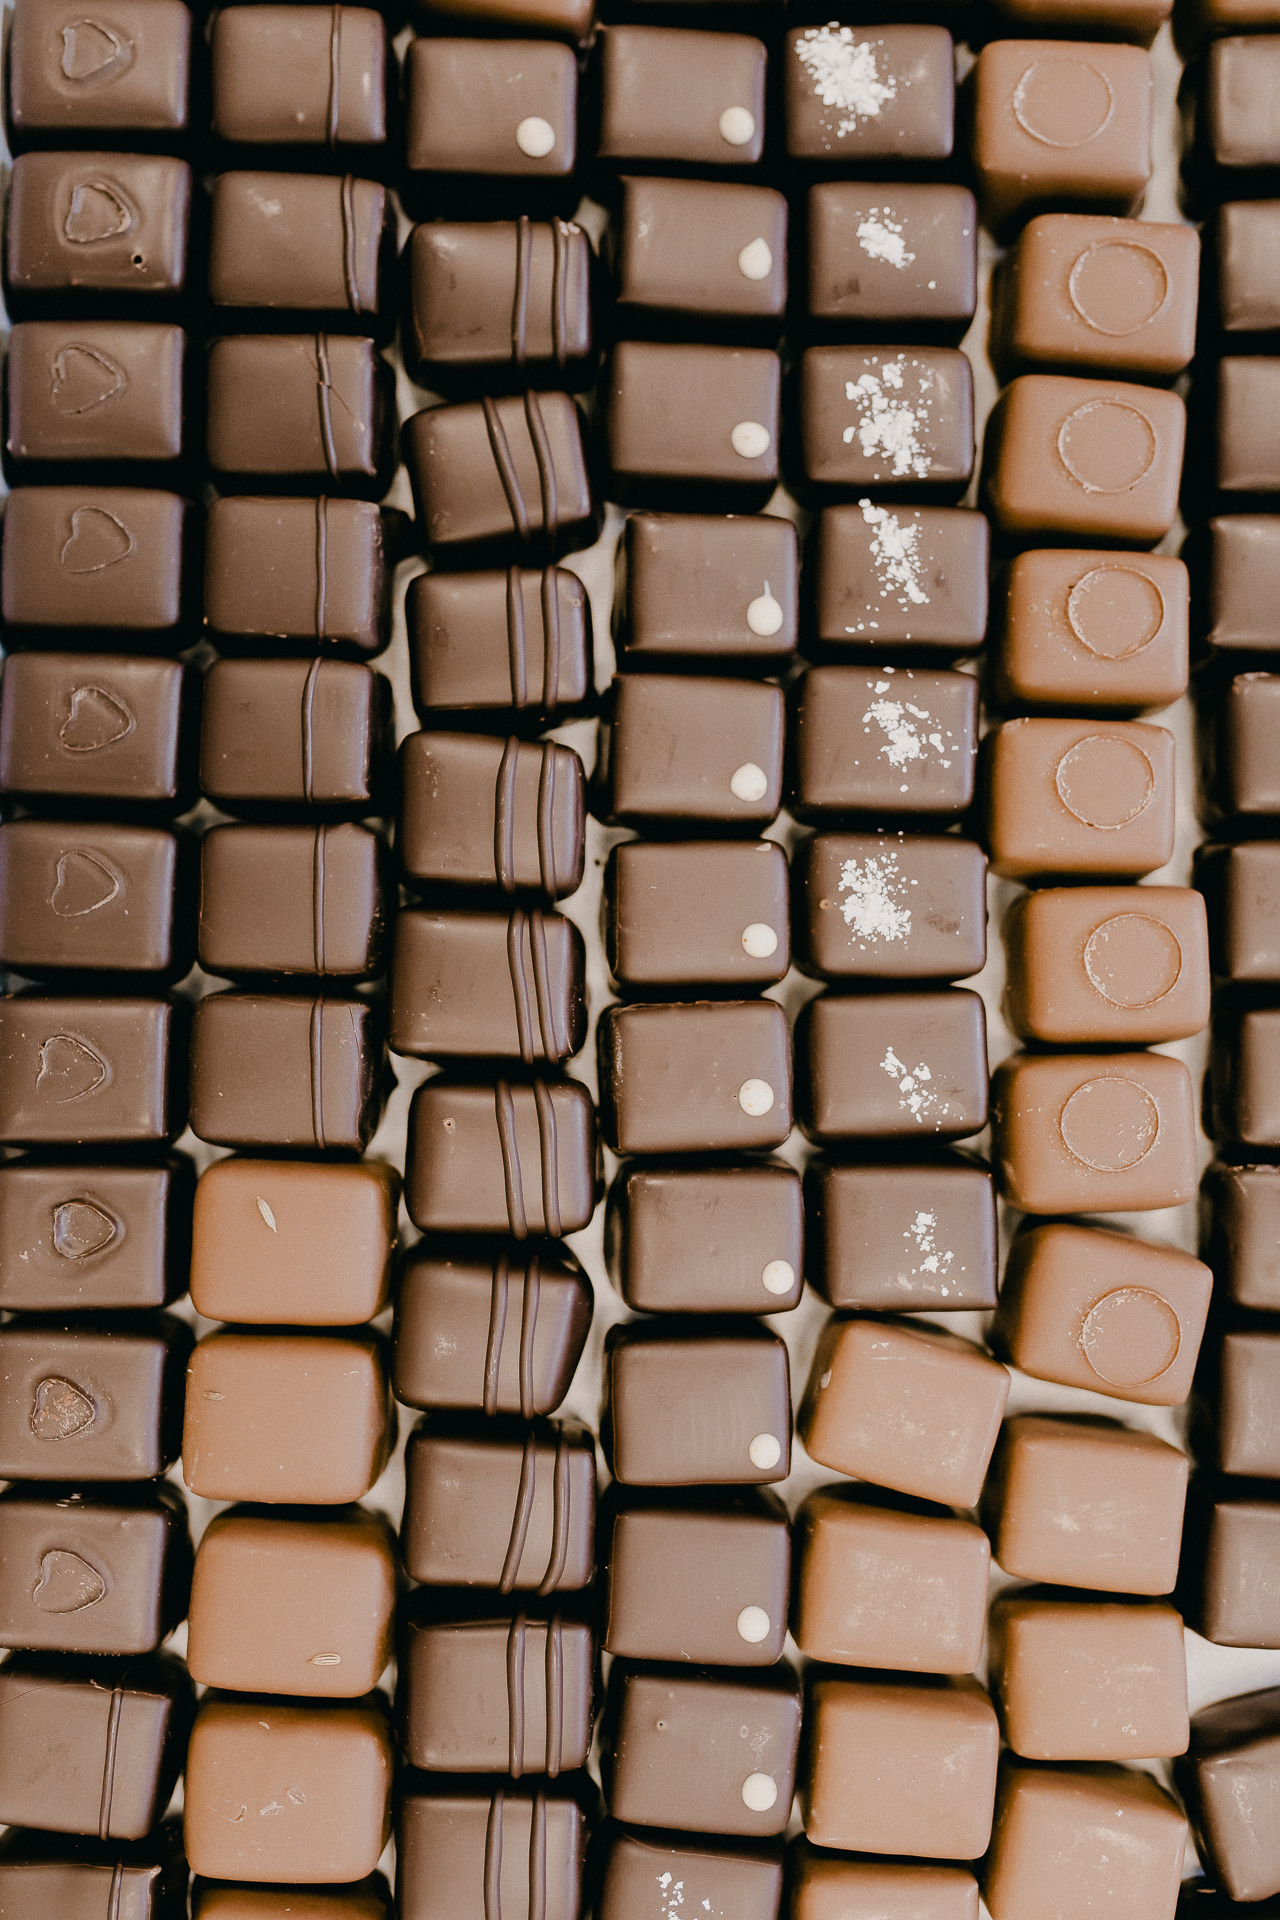 Giotto Bakery – seven rows of chocolate pralines in different shapes and flavours